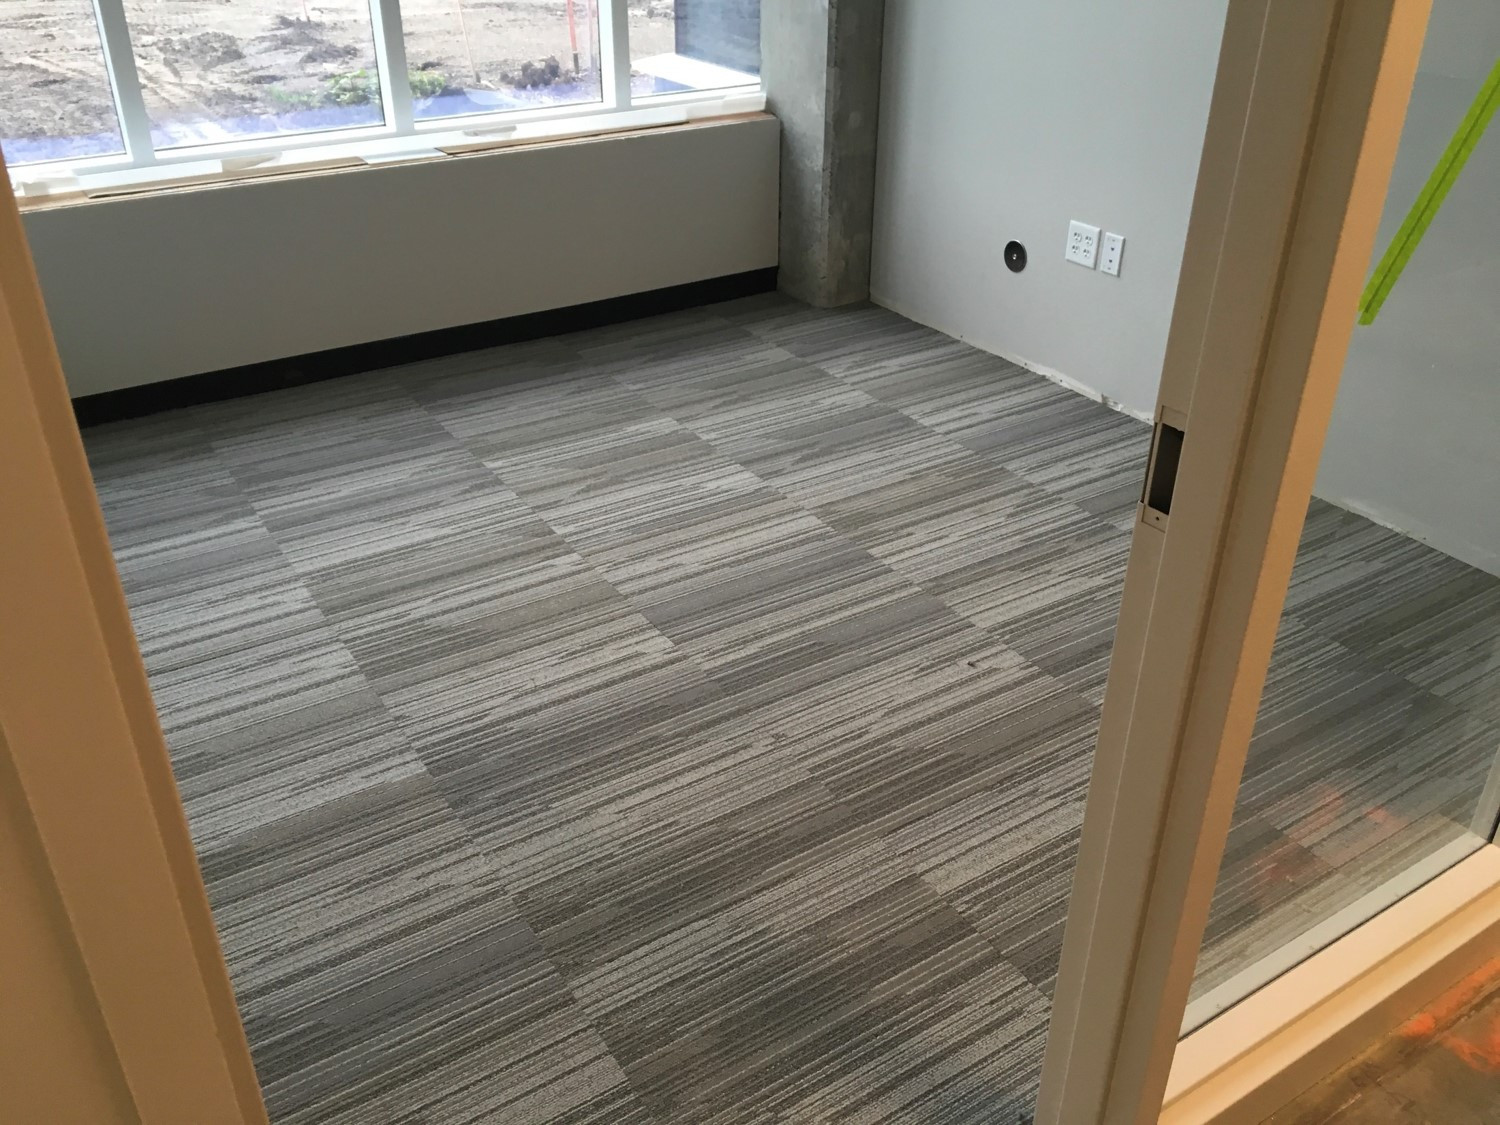 Hardwood Flooring Reviews Consumer Reports Of Uncategorized Archives Page 2 Of 10 Hagfors Center for Science Intended for Carpet Installation is In Progress In the Hagfors Center Offices